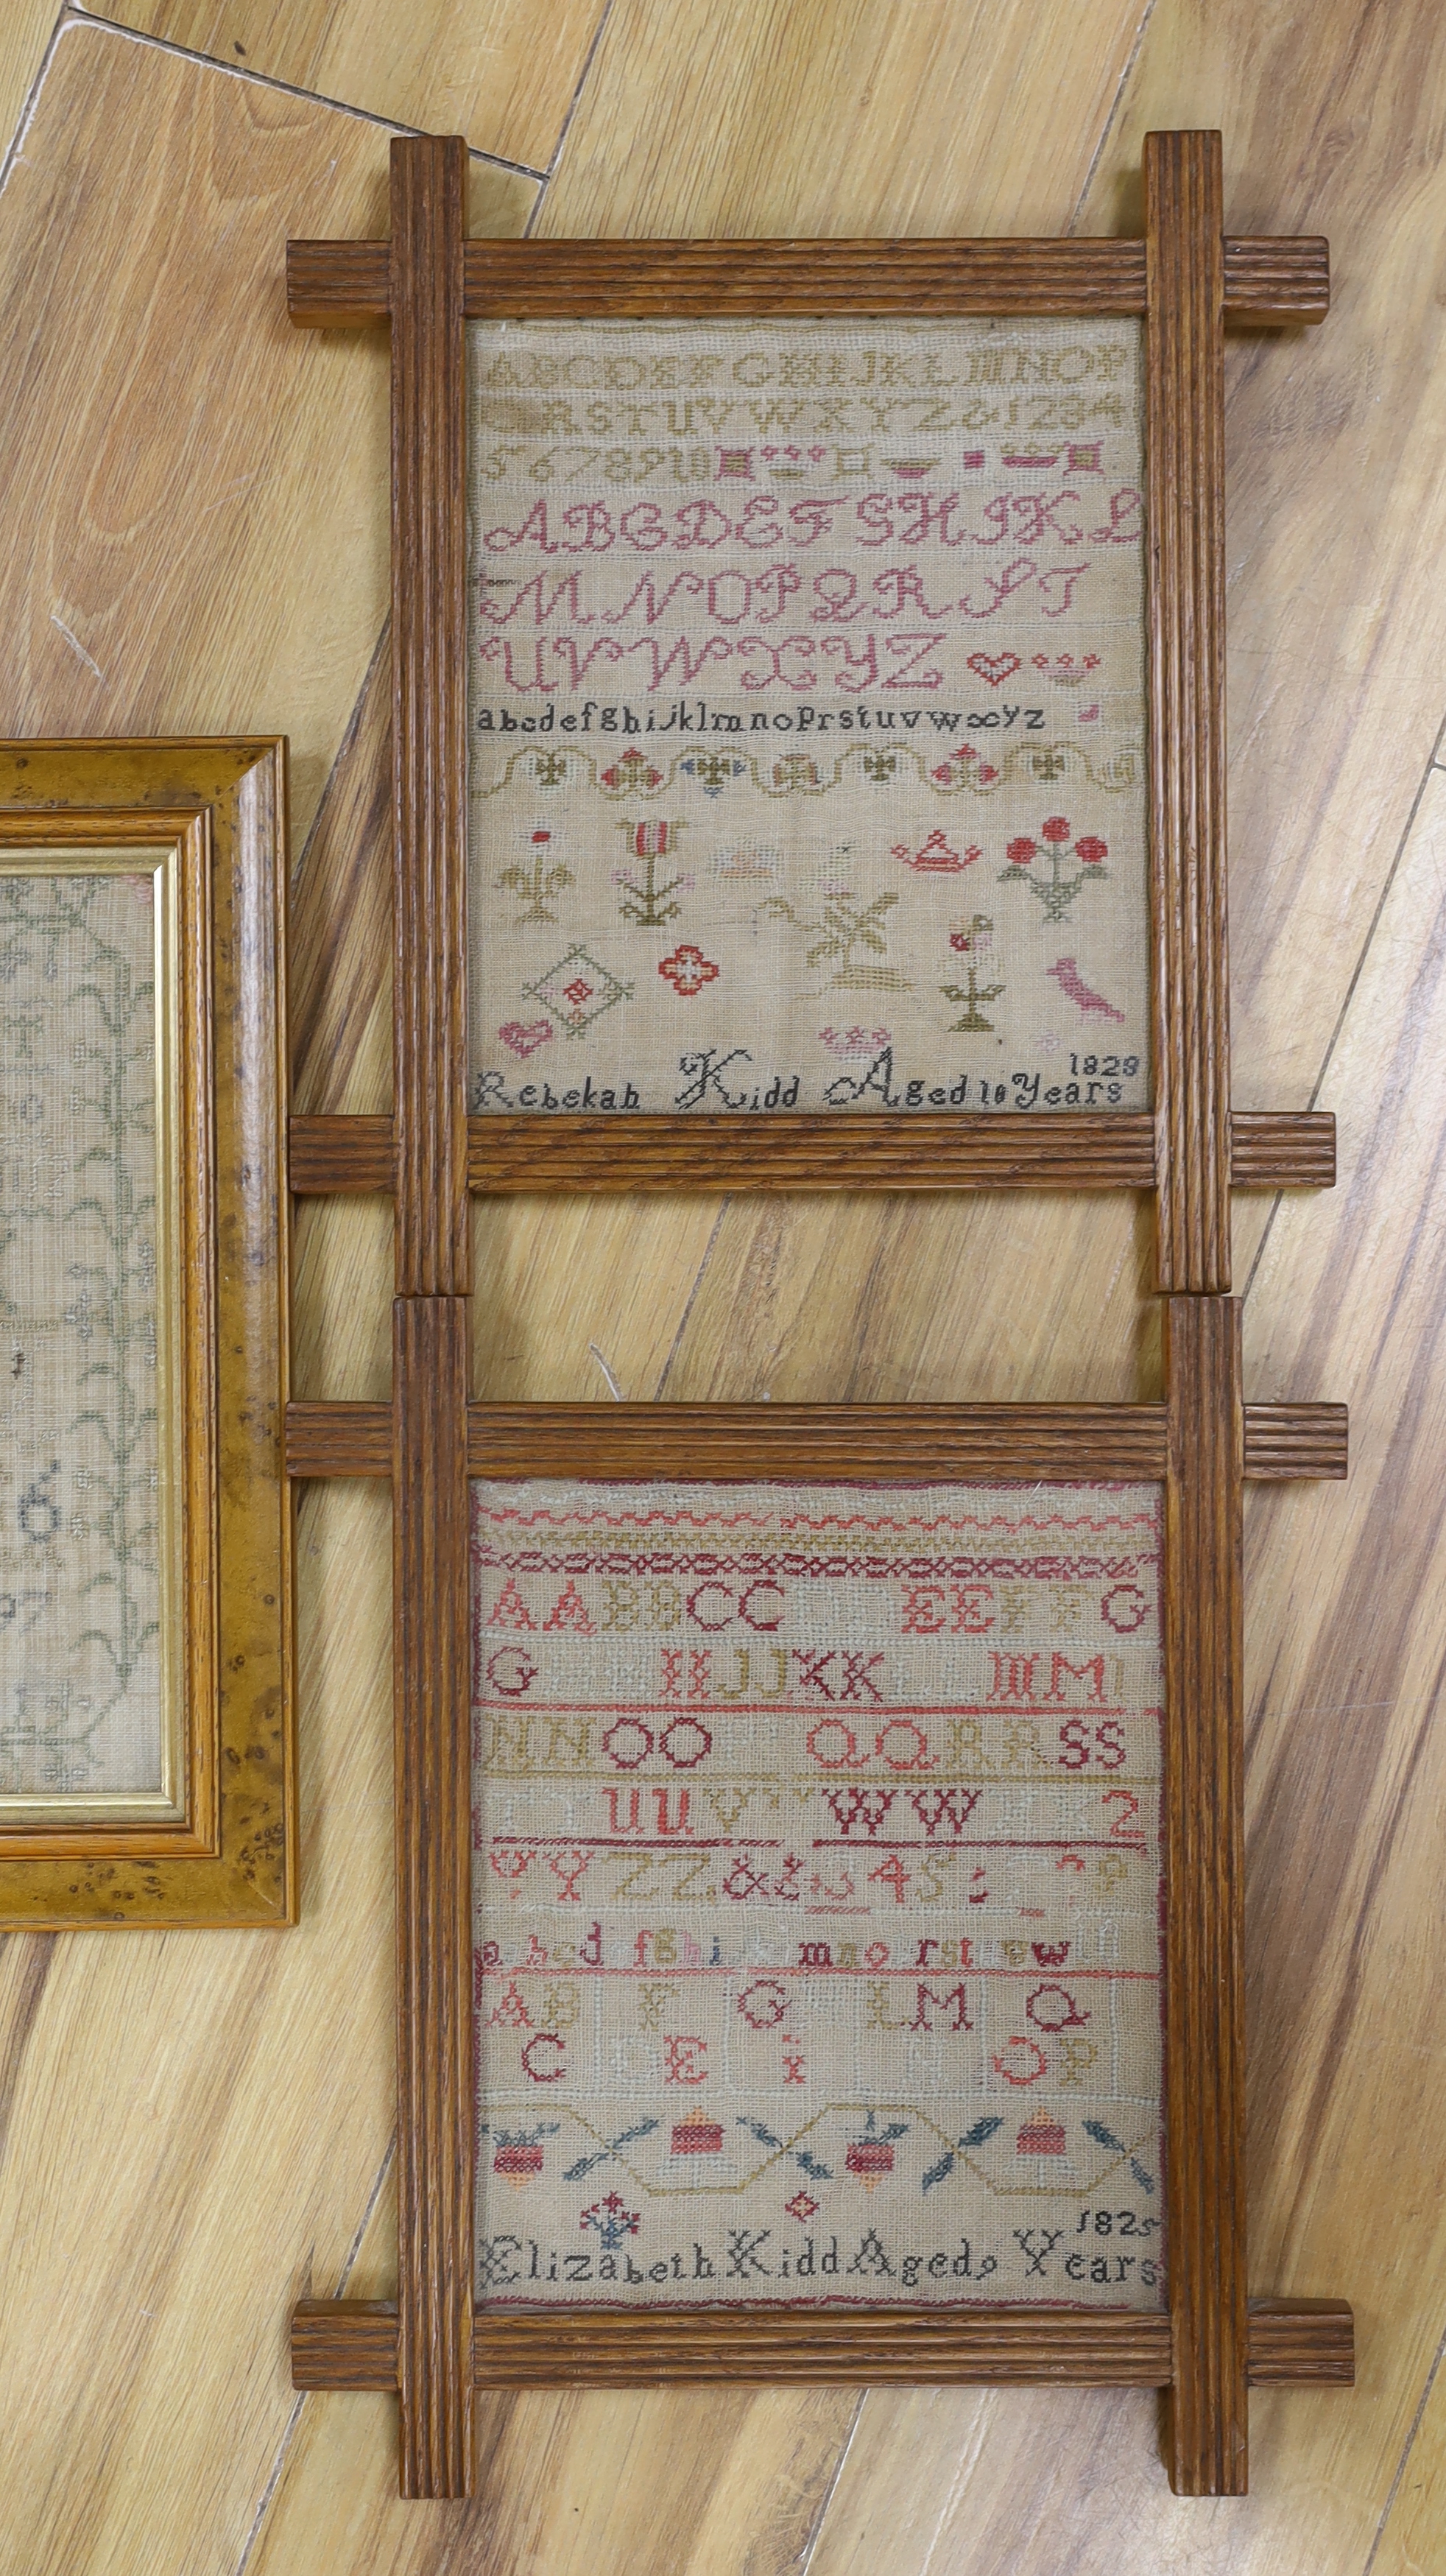 A George III dated 1797 framed alphabet sampler, by Barbara Darling and two similar dated samplers 1825 and 1828 by Elizabeth Kidd, together with a later undated 19th century sampler by Jane Kennedy (4)